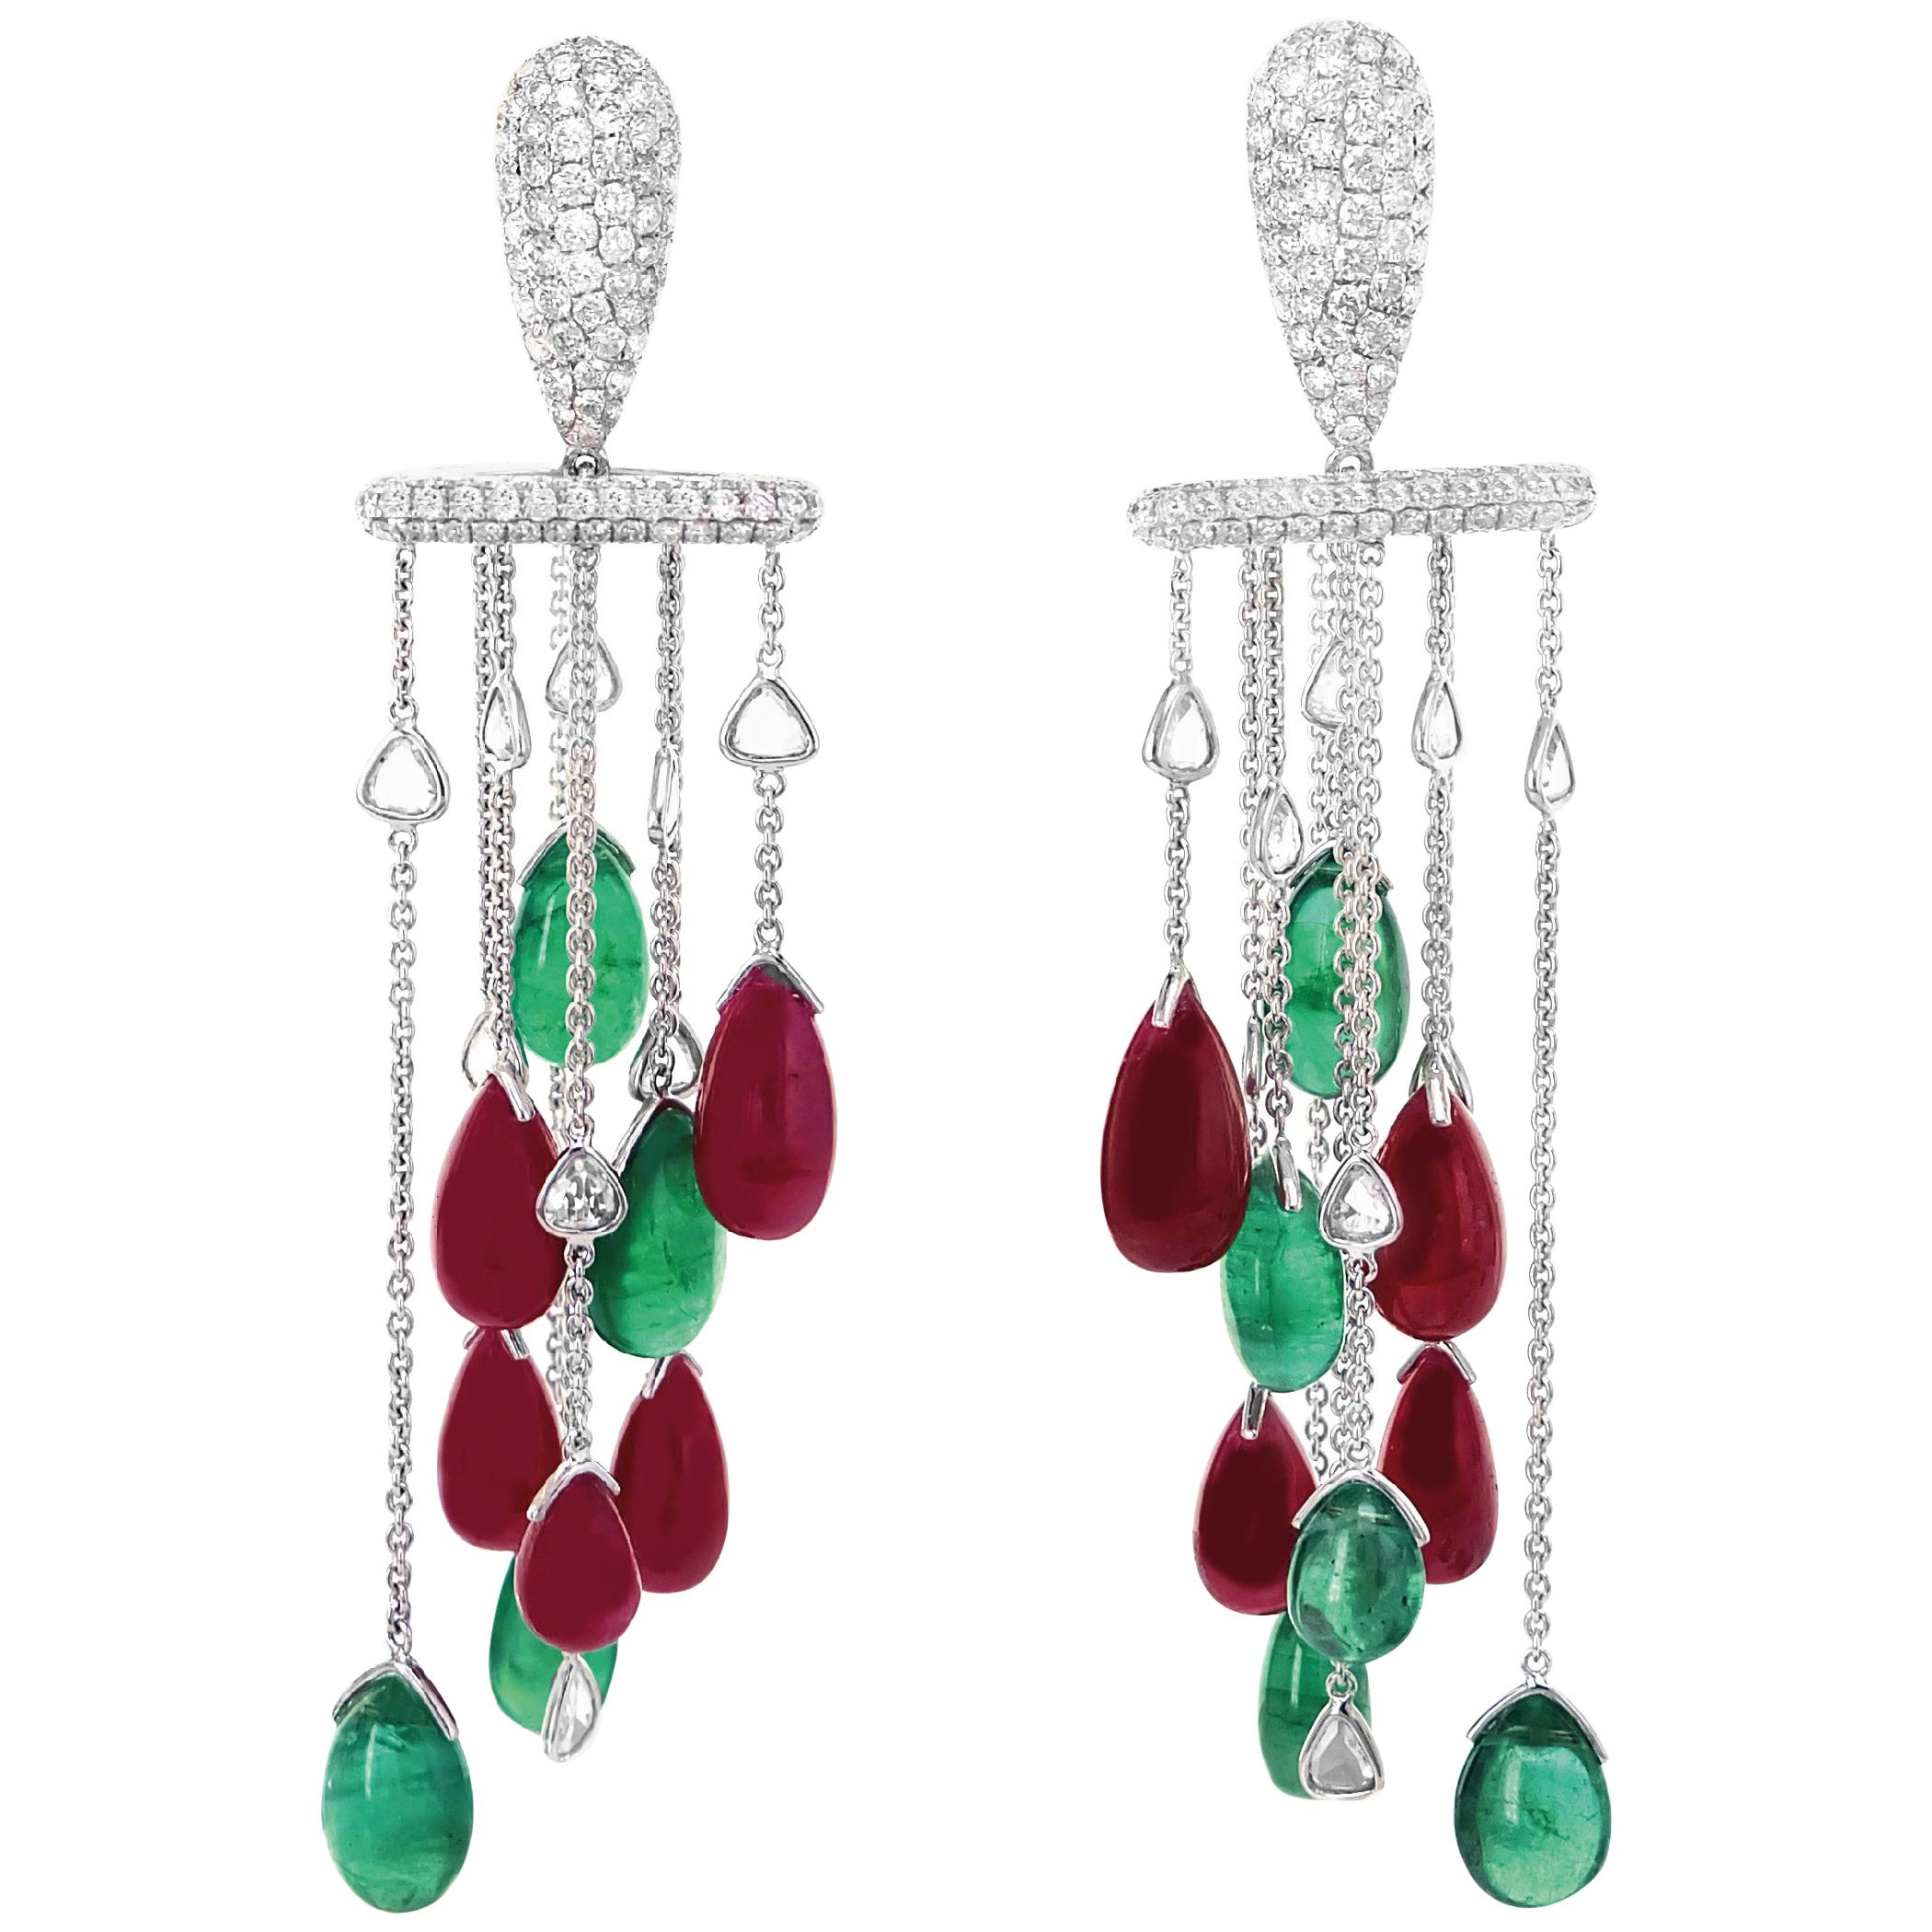 'Equilibrium' Earring Featured Ruby Emerald Diamond Cocktail Stunner For Sale